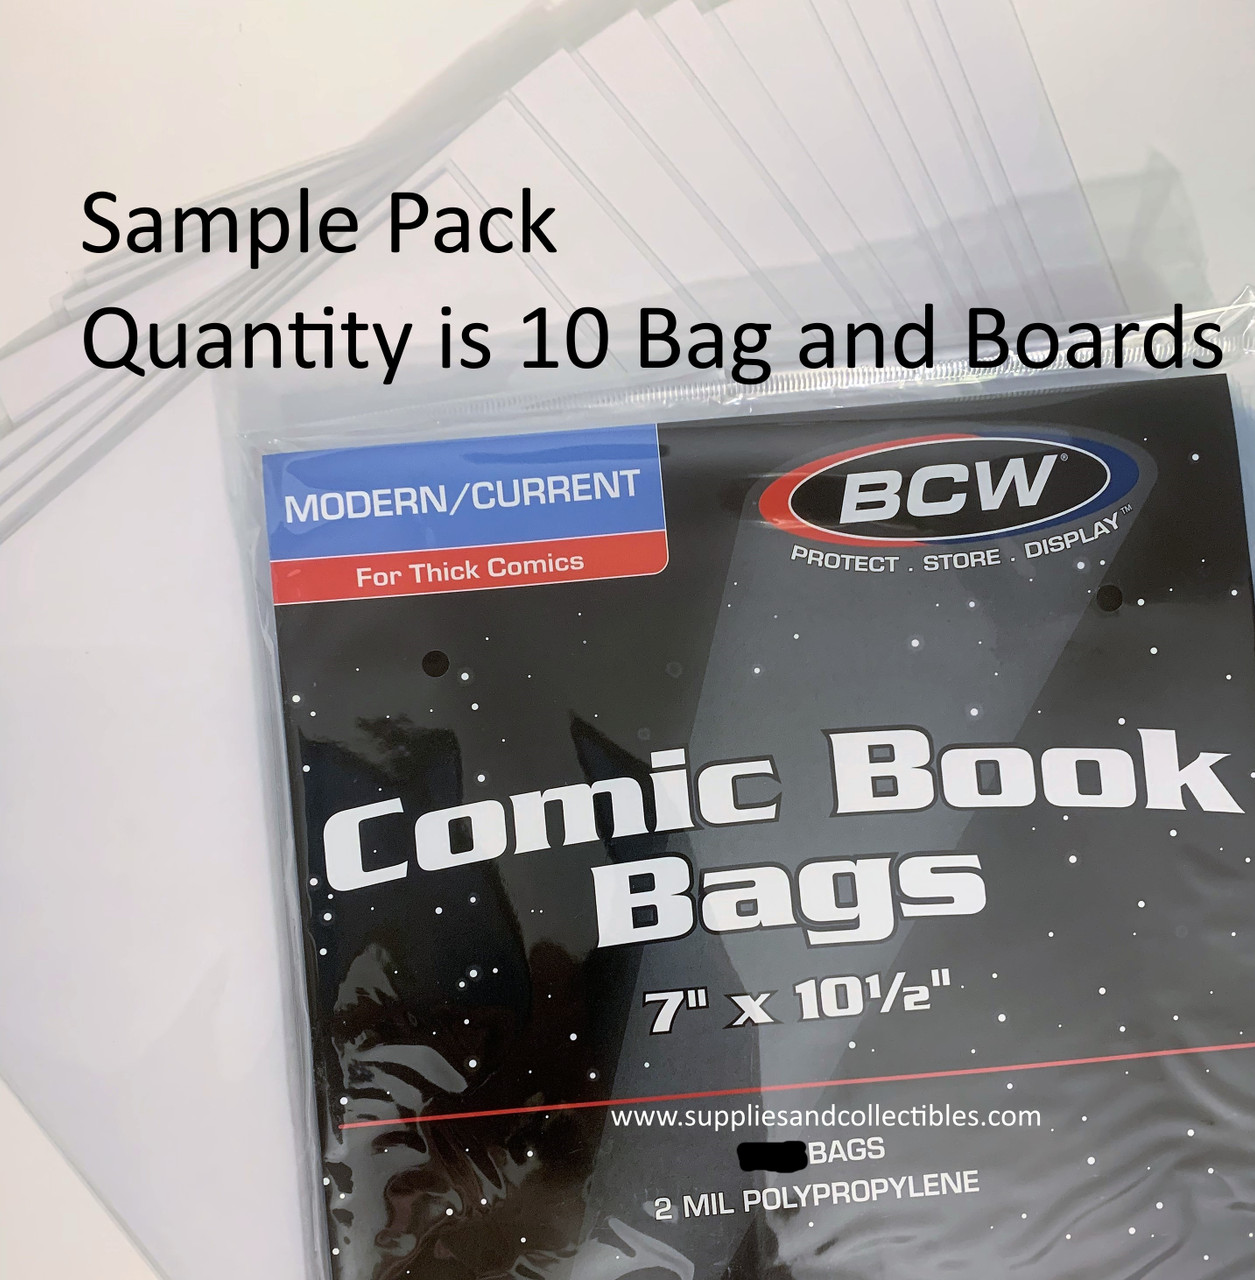 BCW Current / Modern Age Thick Comic Bag & Boards Premade Sample 2 mil